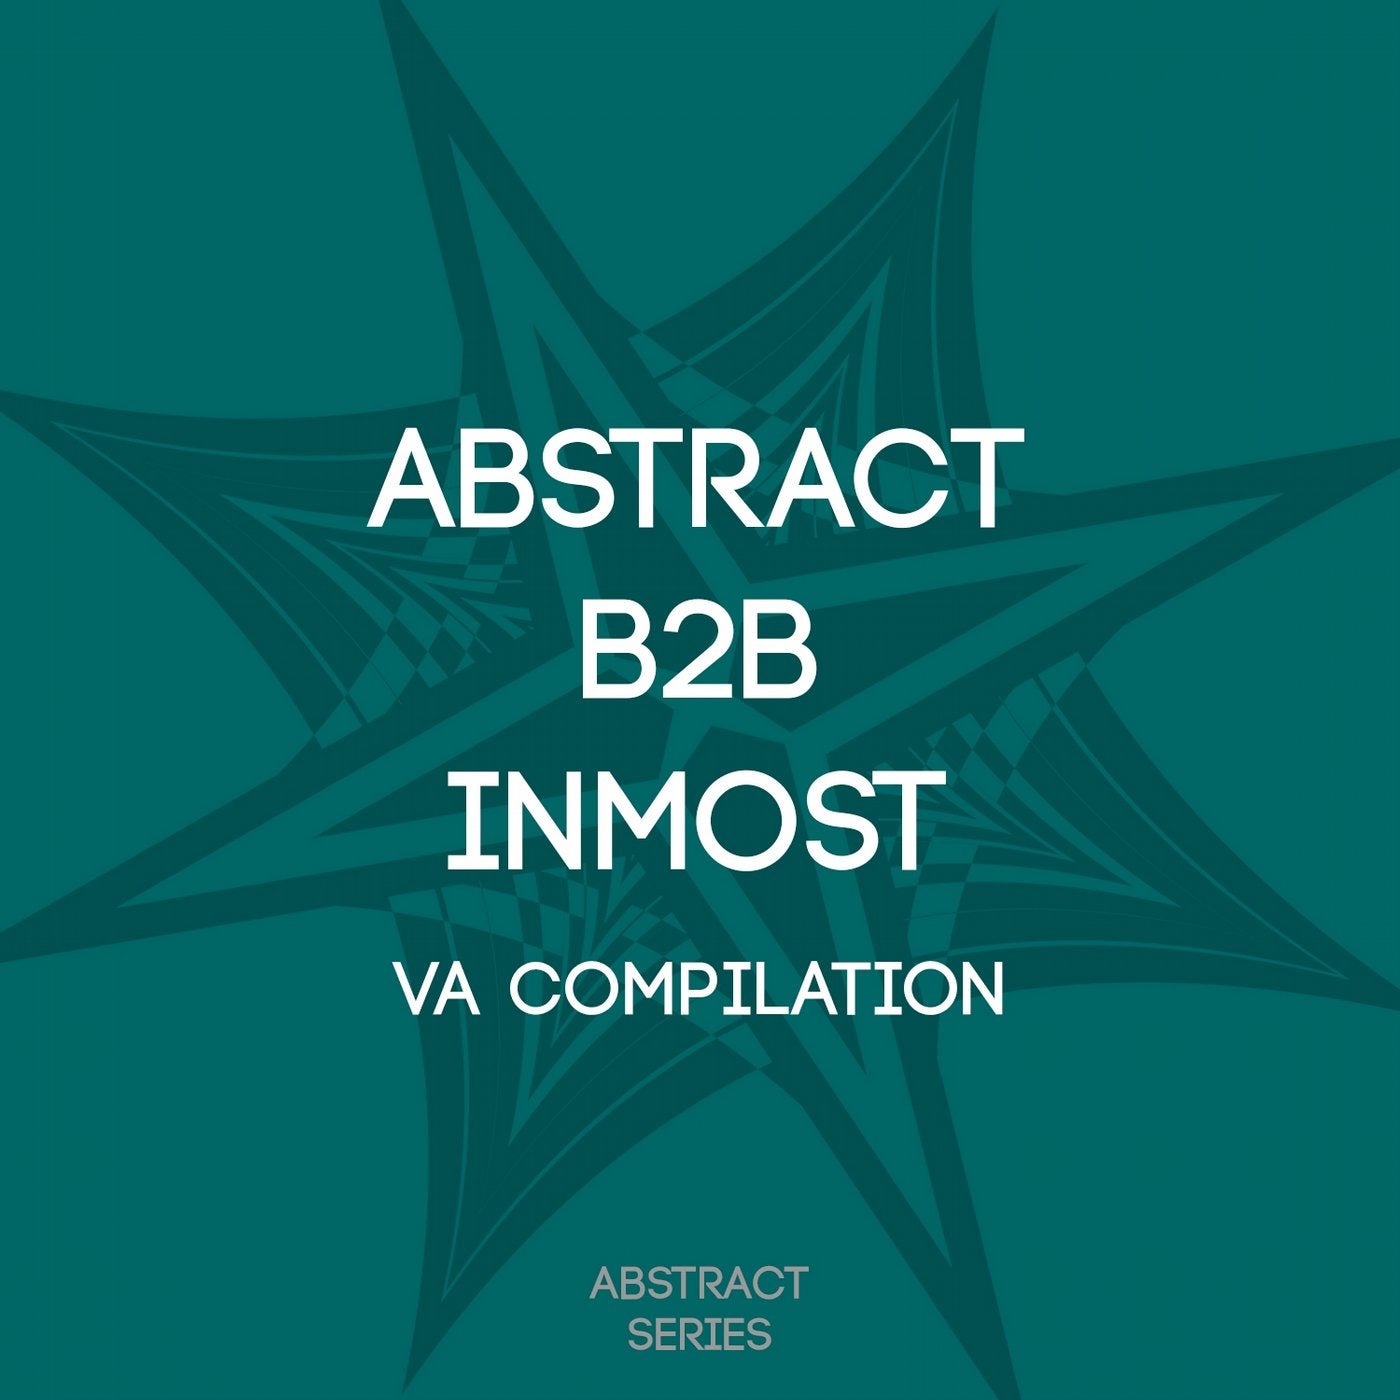 Abstract B2b Inmost